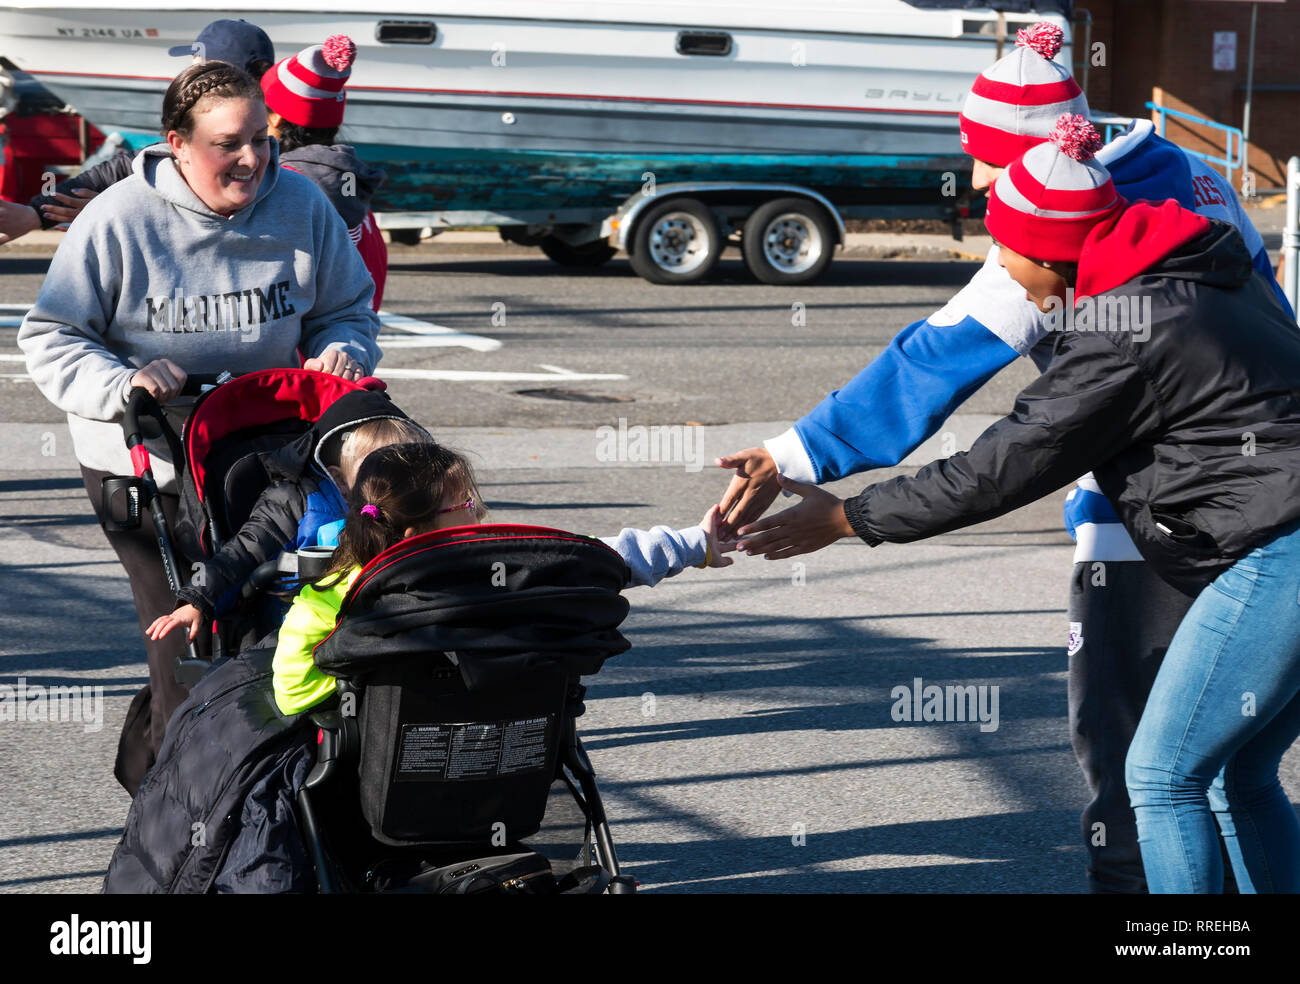 West Islip, NY, USA - 24 November 2017: Even the kids in a stroller get high fives as they get closer to the finish line of the annual Run Your Turkey Stock Photo